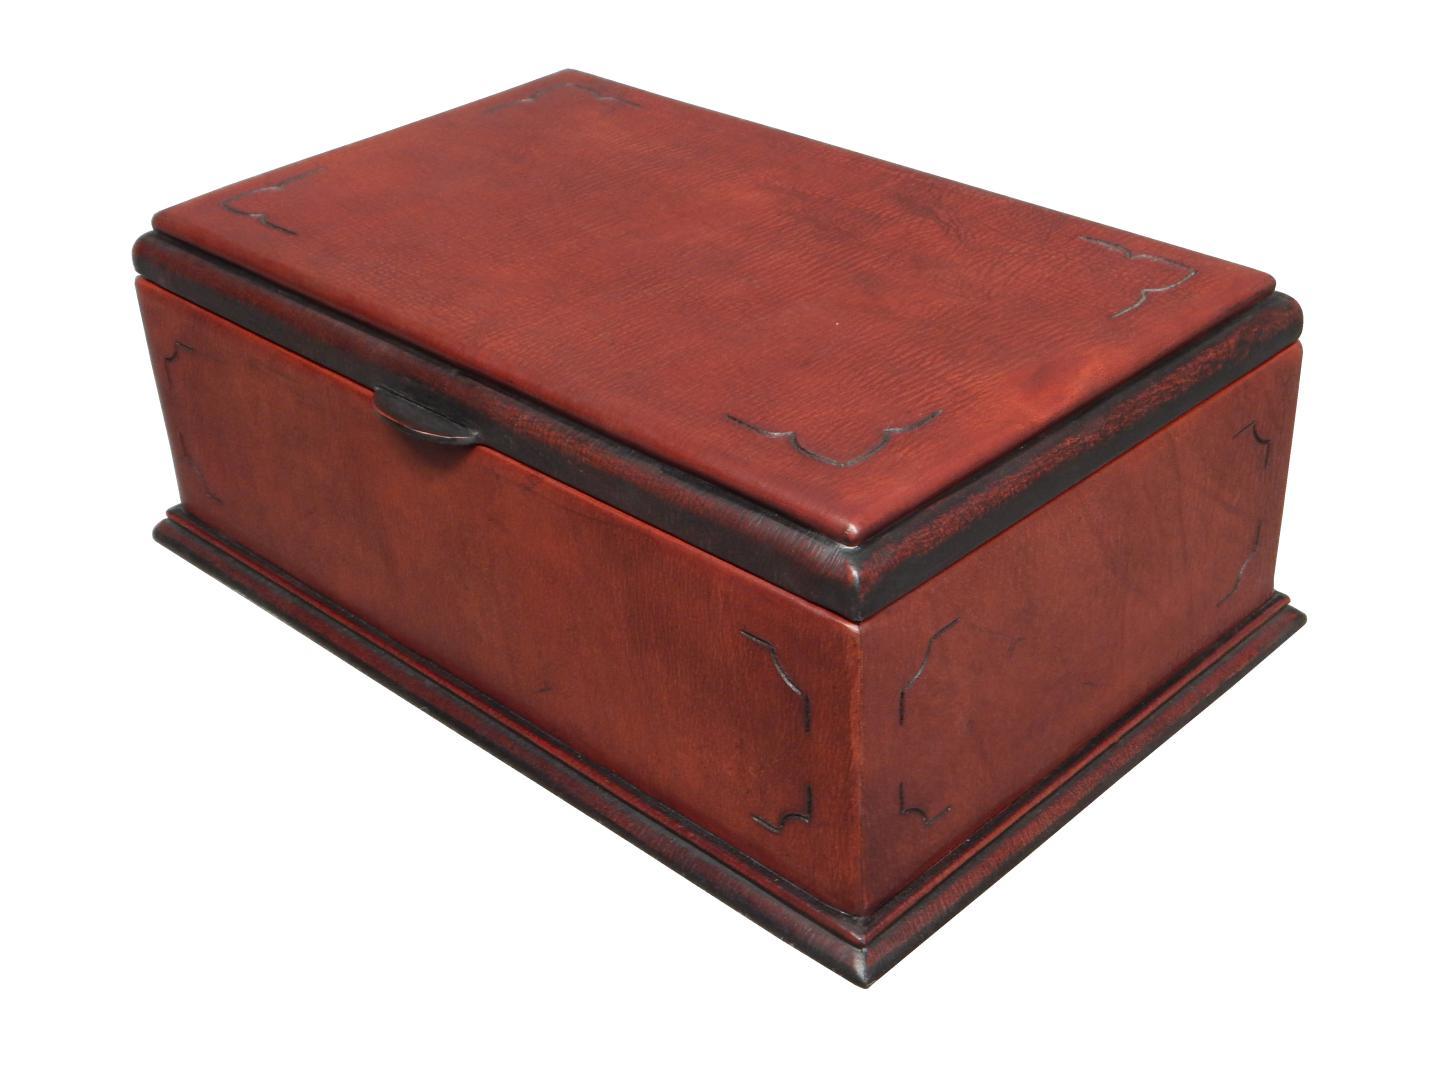 leather box with a cut design on the top